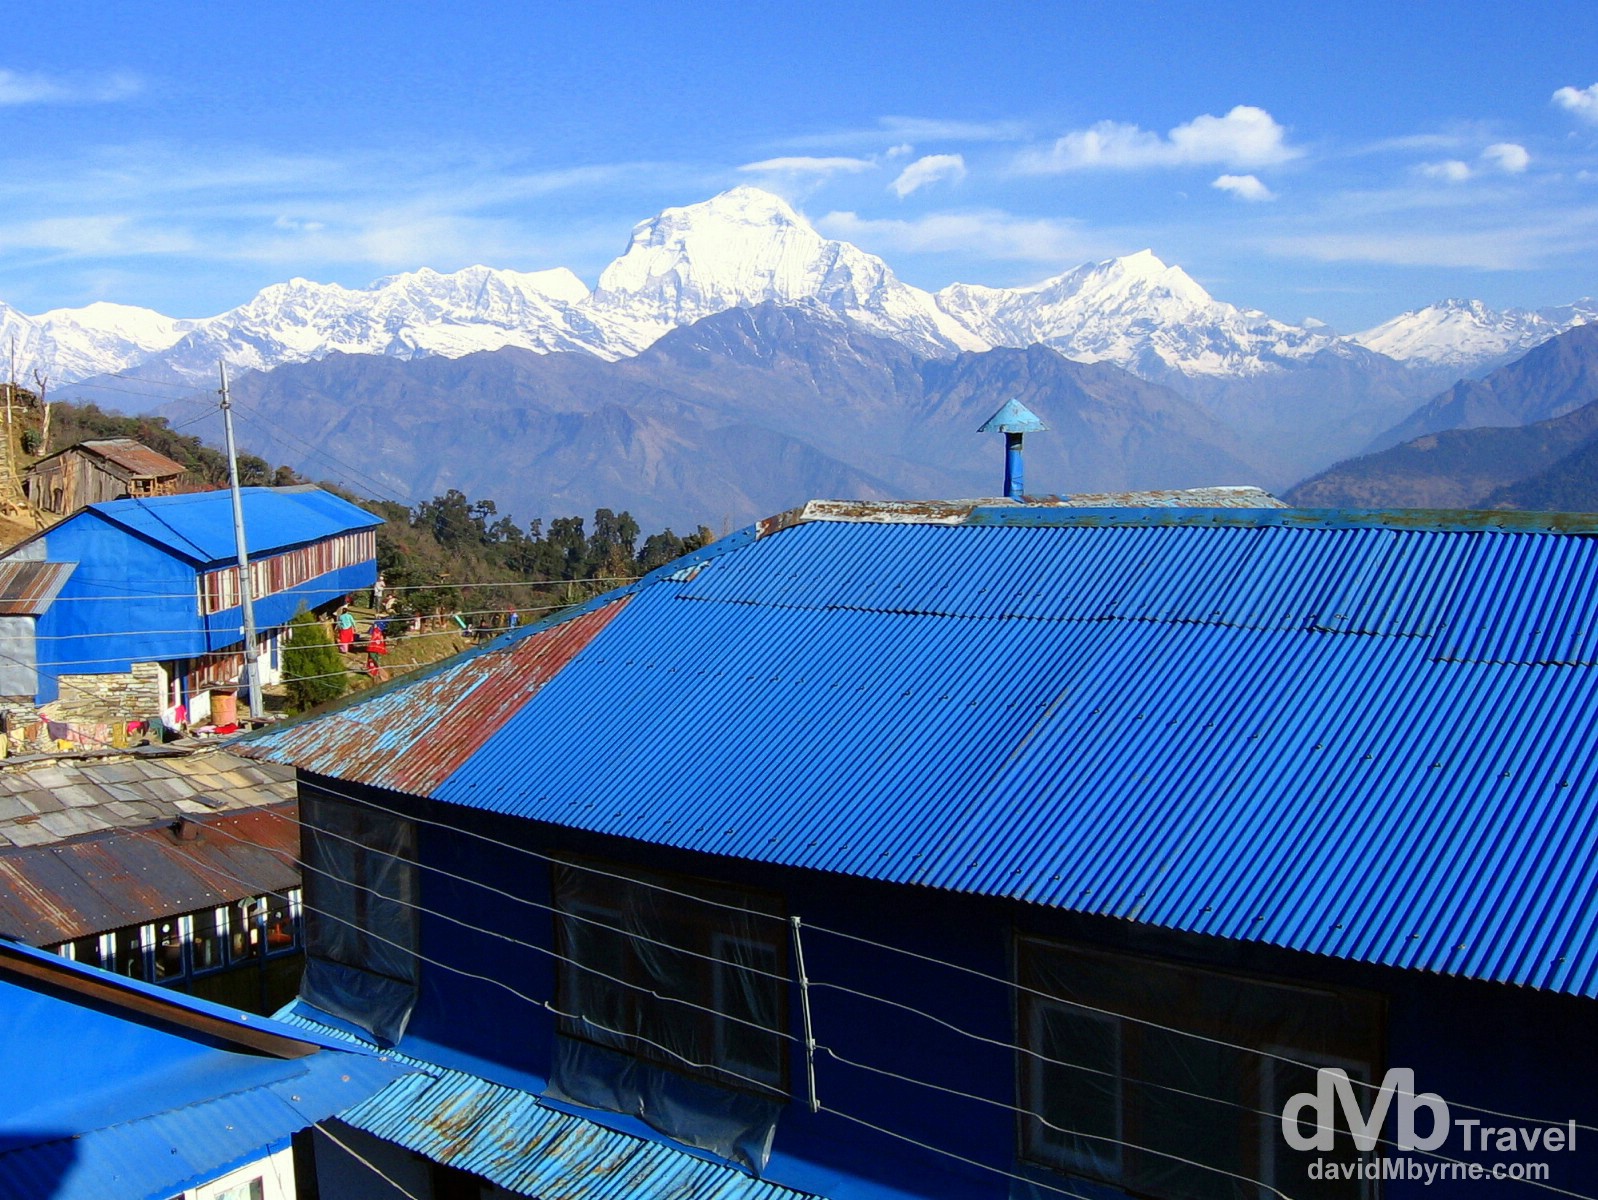 The distinctive blue galvanised roofs of the buildings of Ghorepani village in the Annapurna Conservation Area, western Nepal. March 12th, 2008.